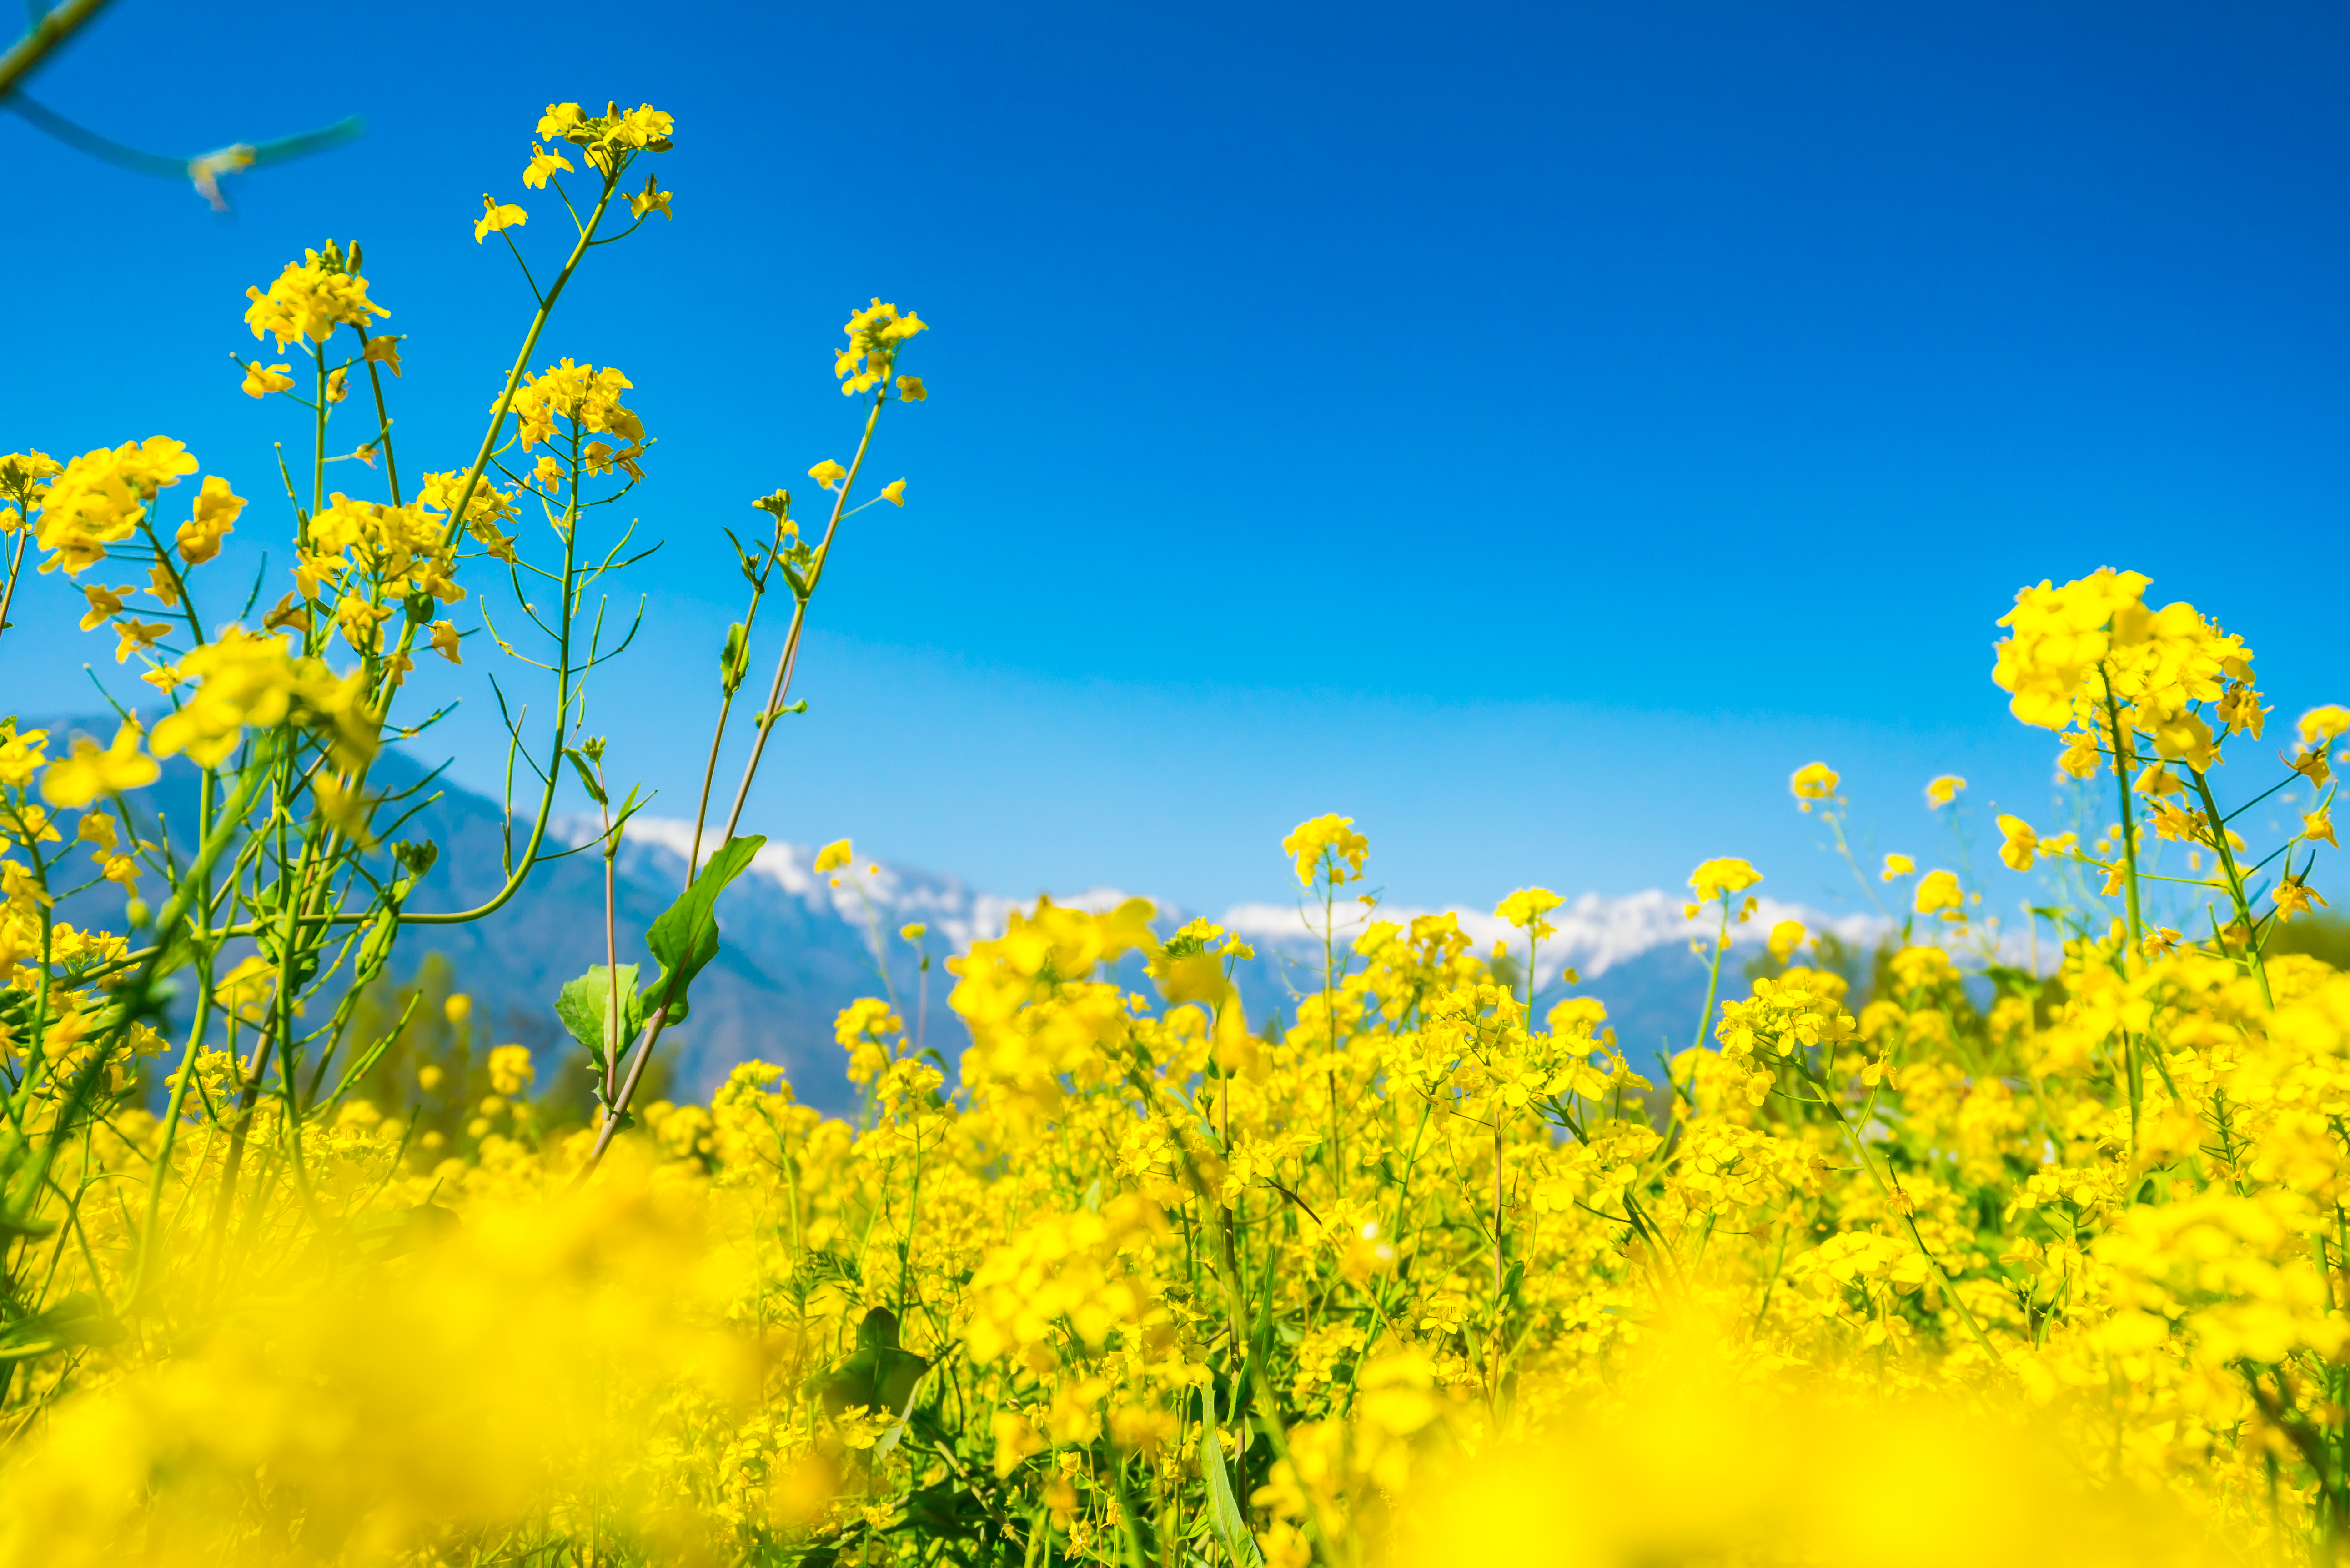 How To Keep Your Mustard Crops Healthy?